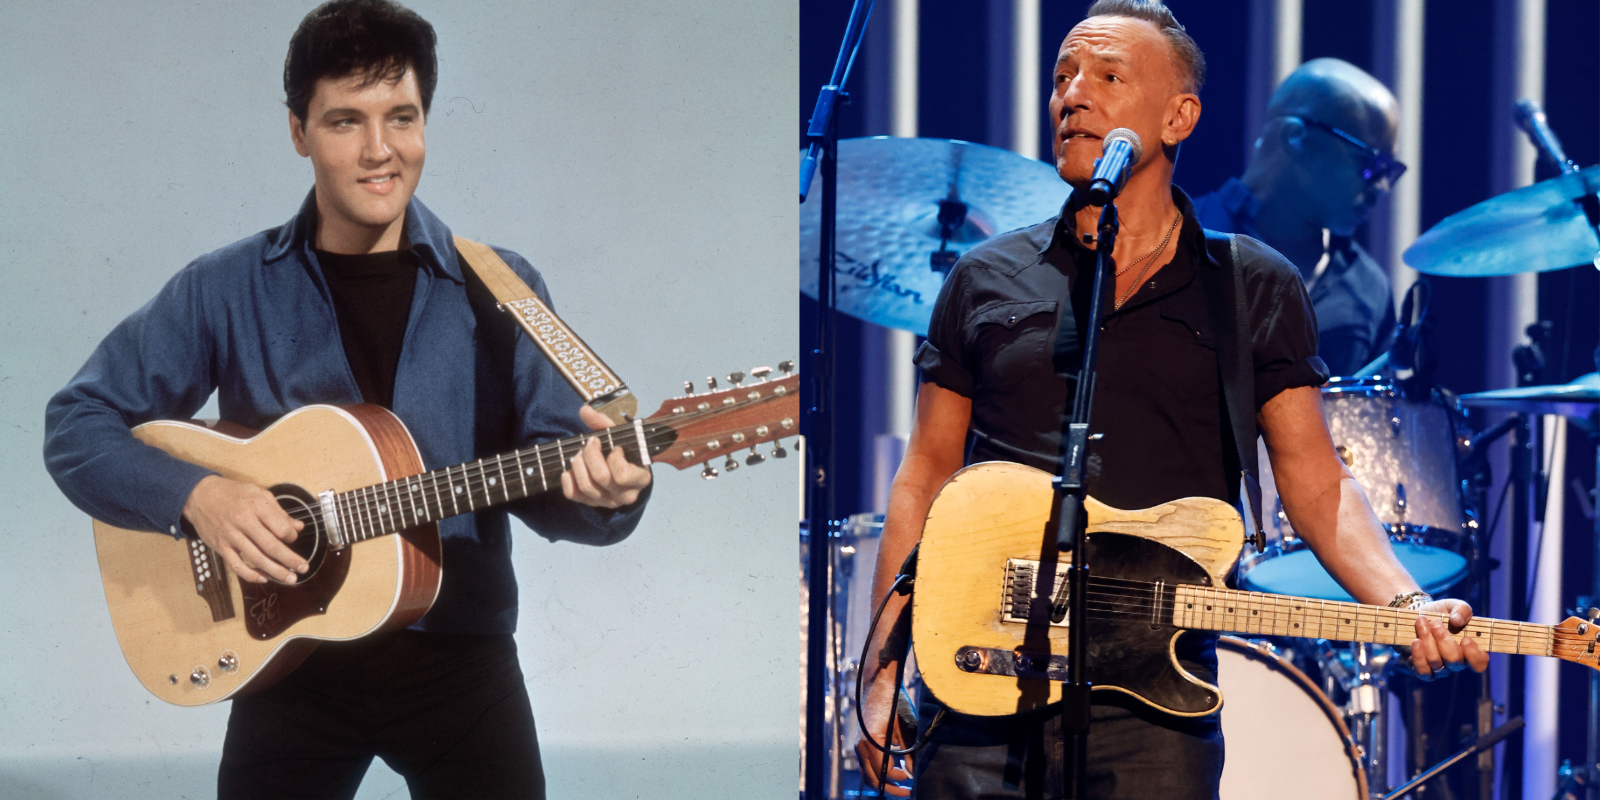 Elvis Presley and Bruce Springsteen hold guitars in side by side photographs.